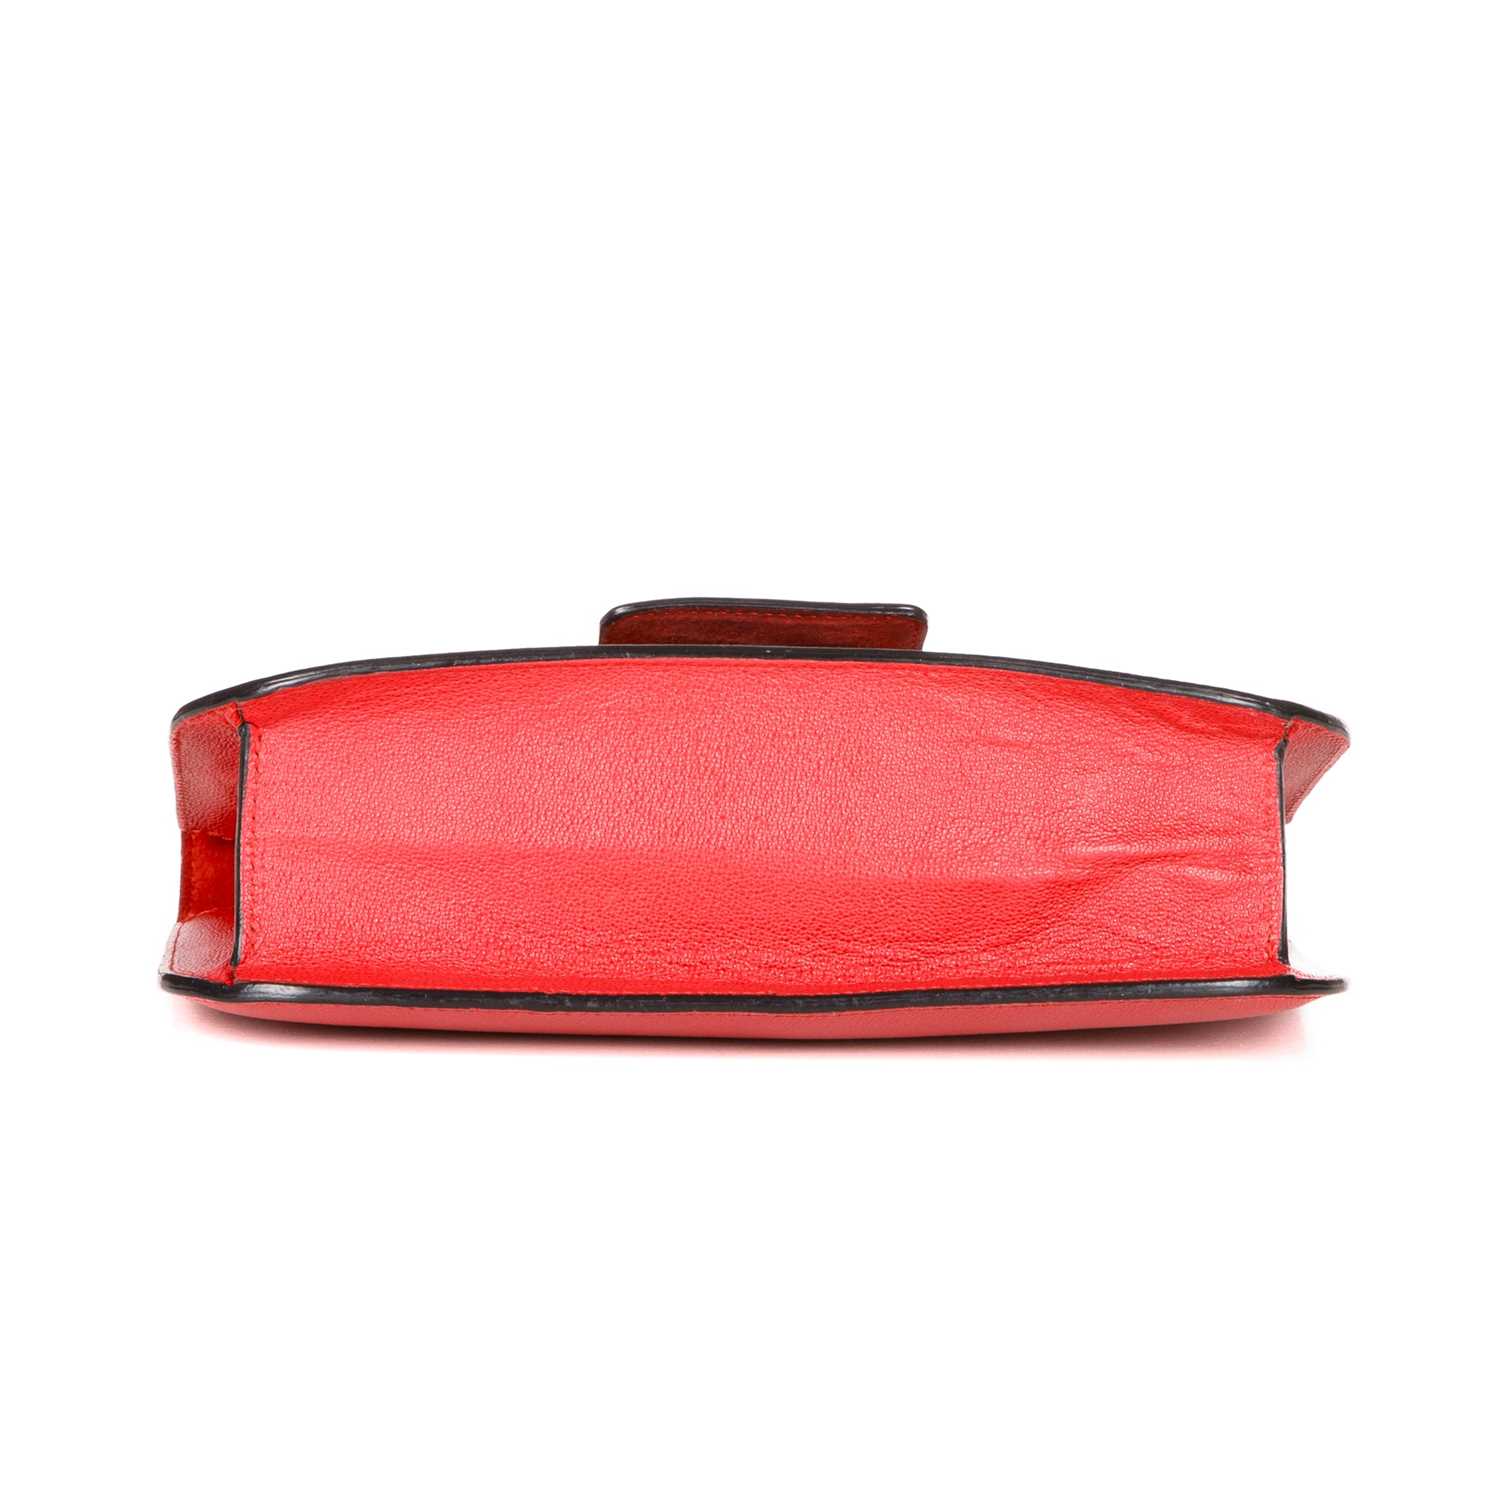 Alexander McQueen, an AMQ Insignia Chain handbag, crafted from red calfskin leather, with polished - Image 5 of 5